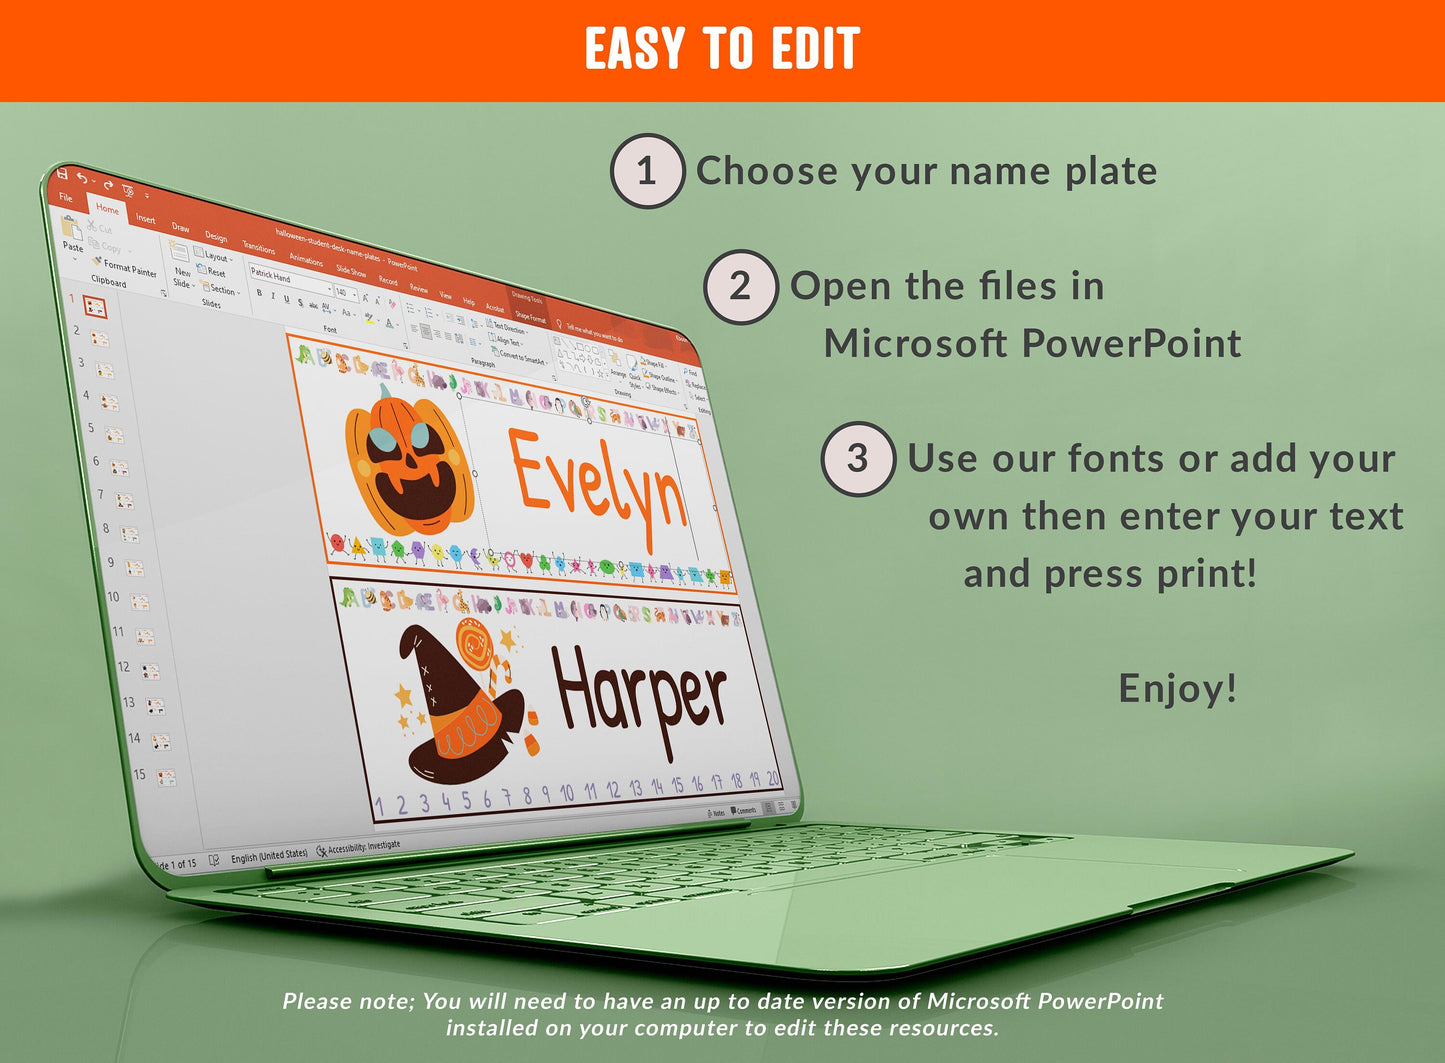 Student Desk Plates 30 Printable/Editable Halloween Classroom Name Tags/Name Plates for Student, a Helpful Addition to Your Classroom